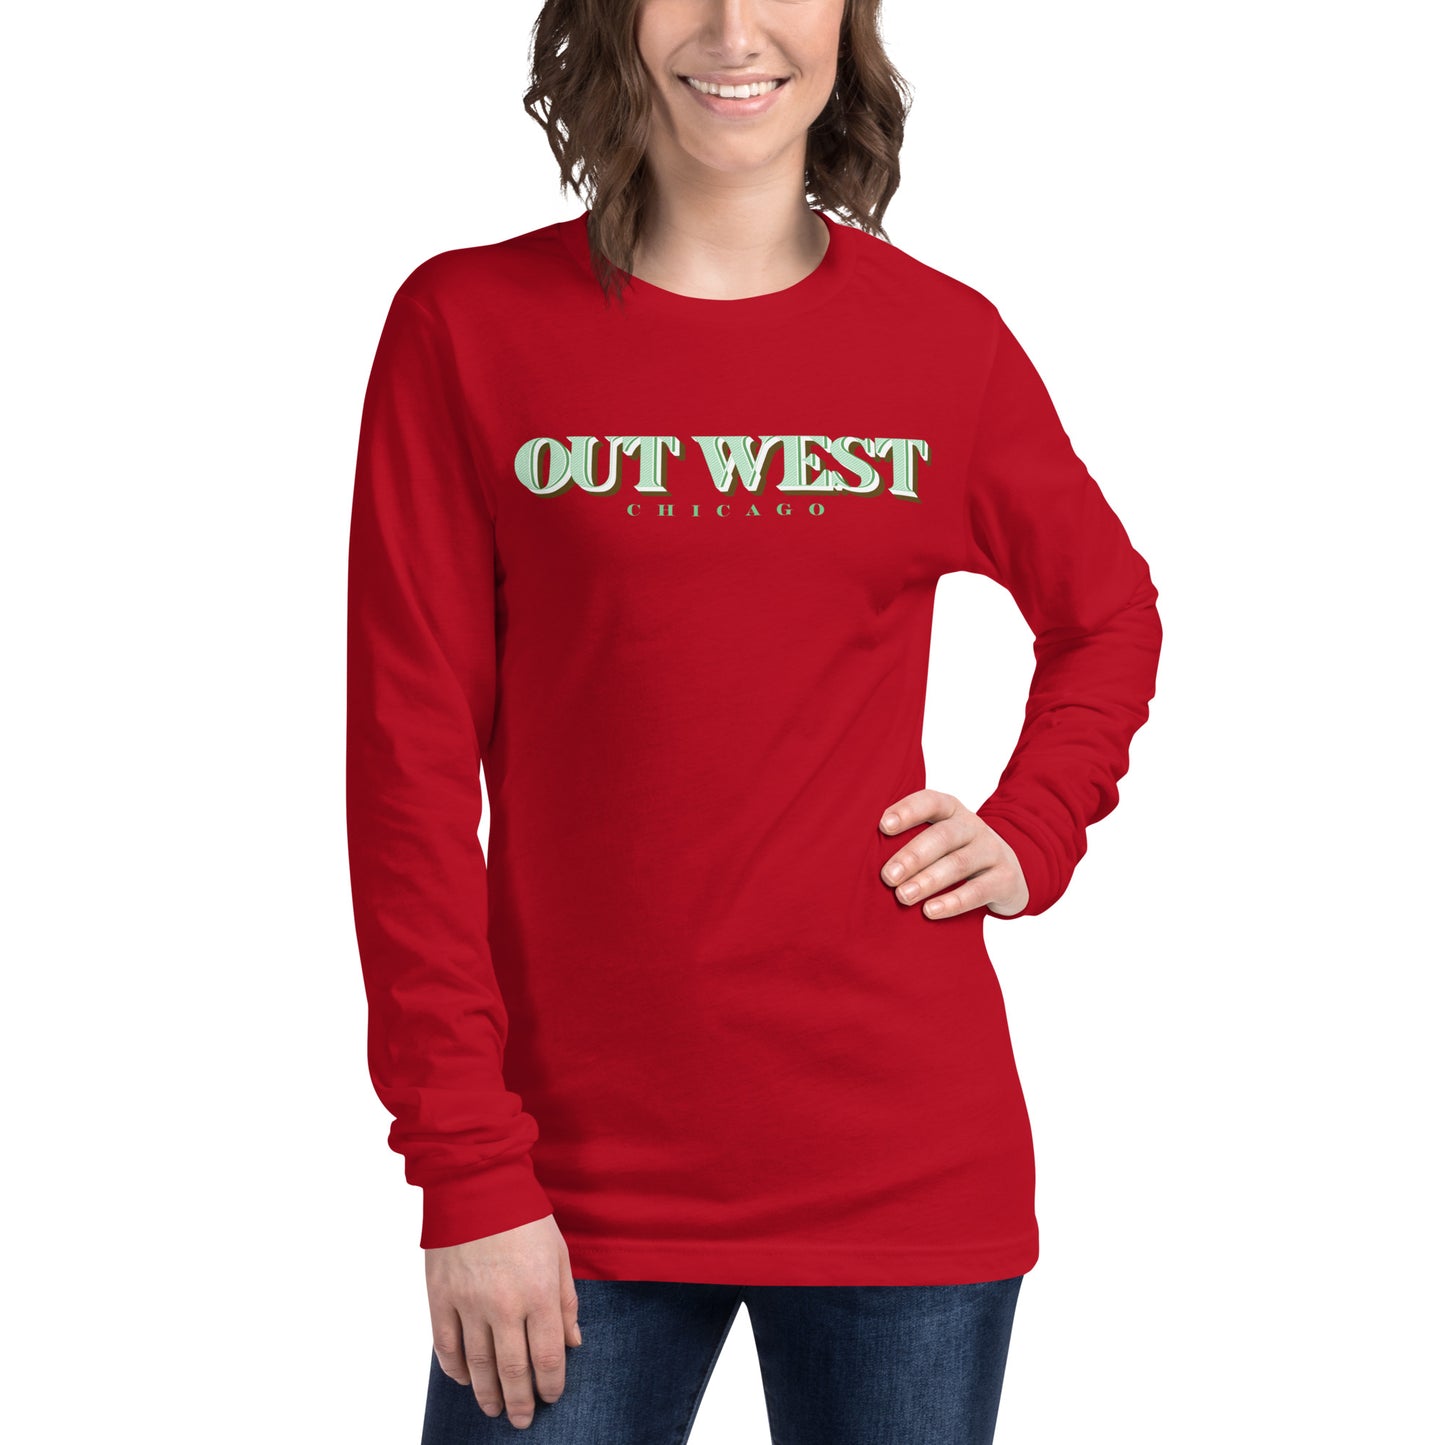 OUT WEST CHICAGO Women's Long Sleeve Tee